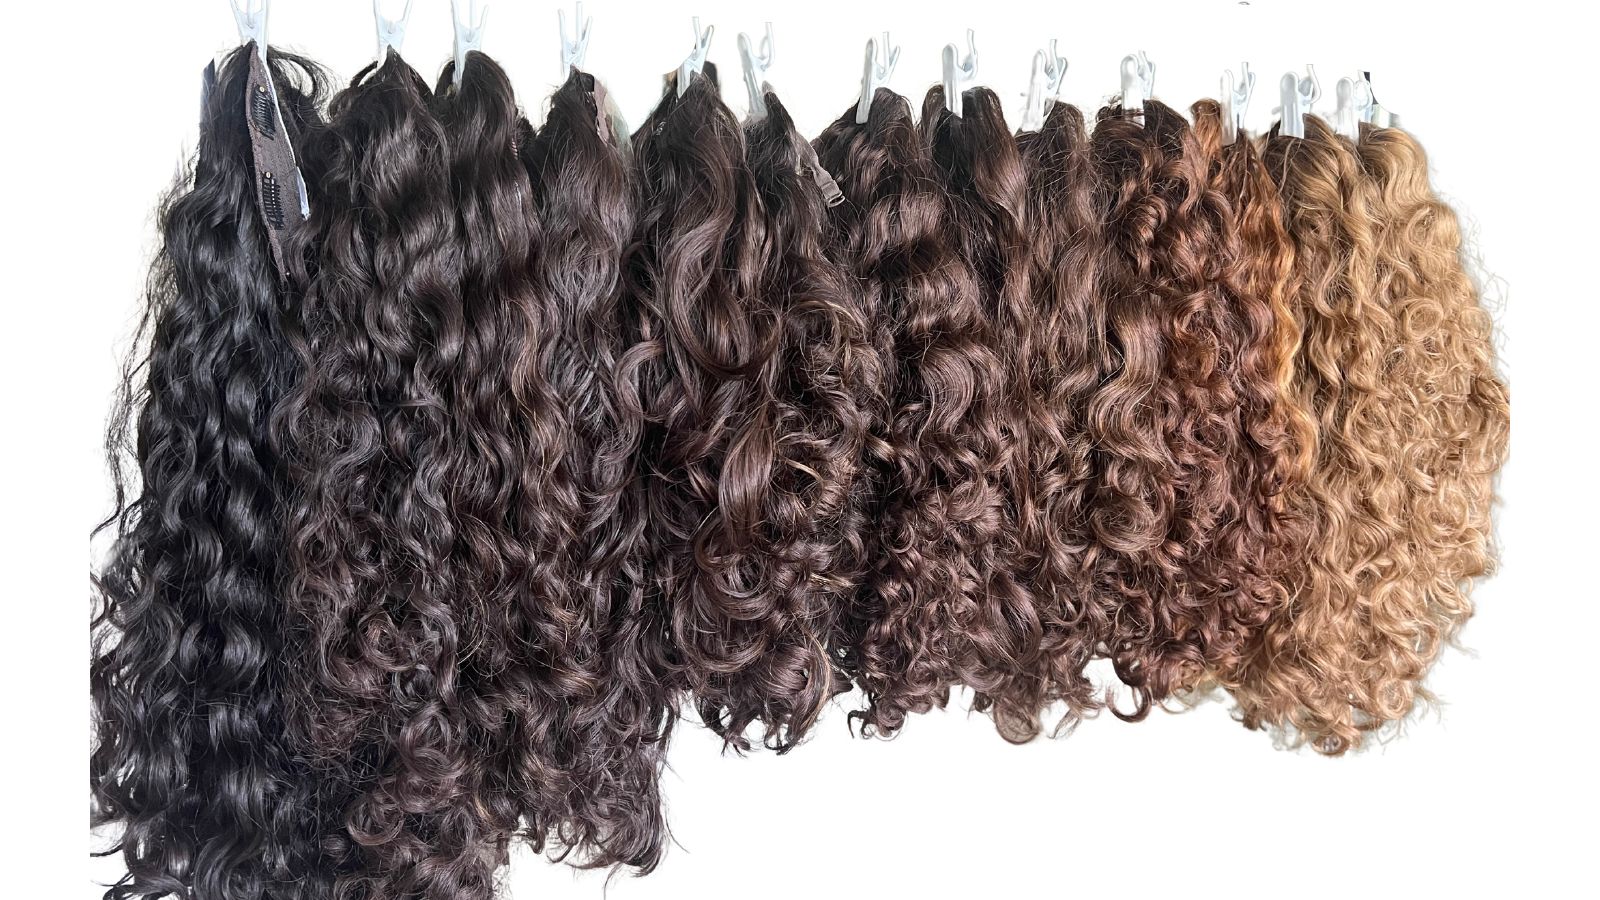 Customized Curls by Wave Hair Collection